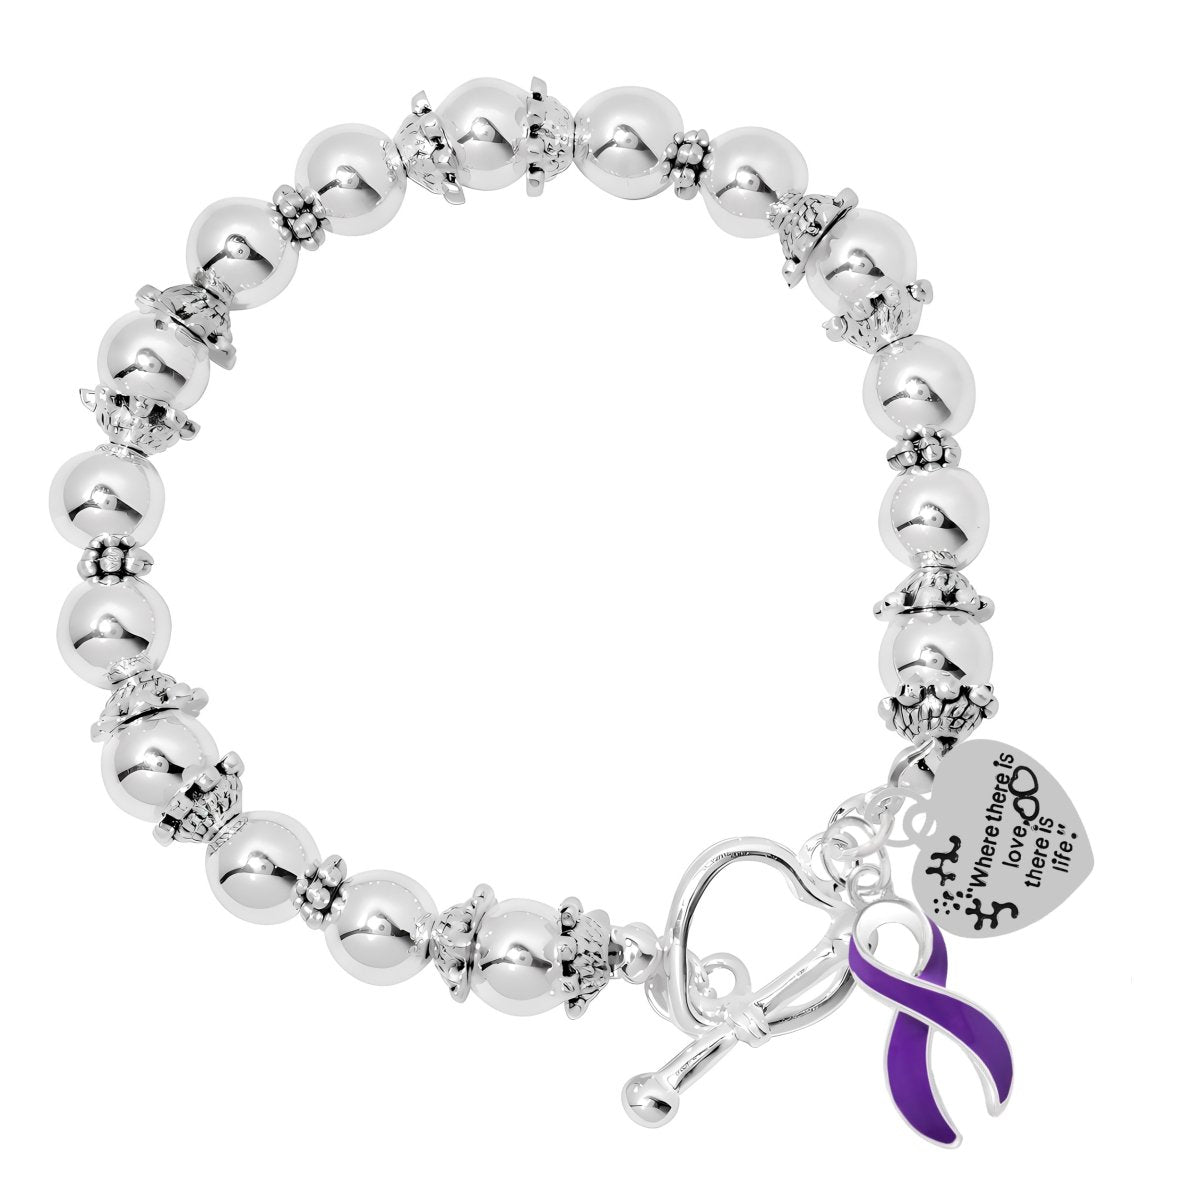 Where There is Love Alzheimer's Ribbon Bracelets - Fundraising For A Cause